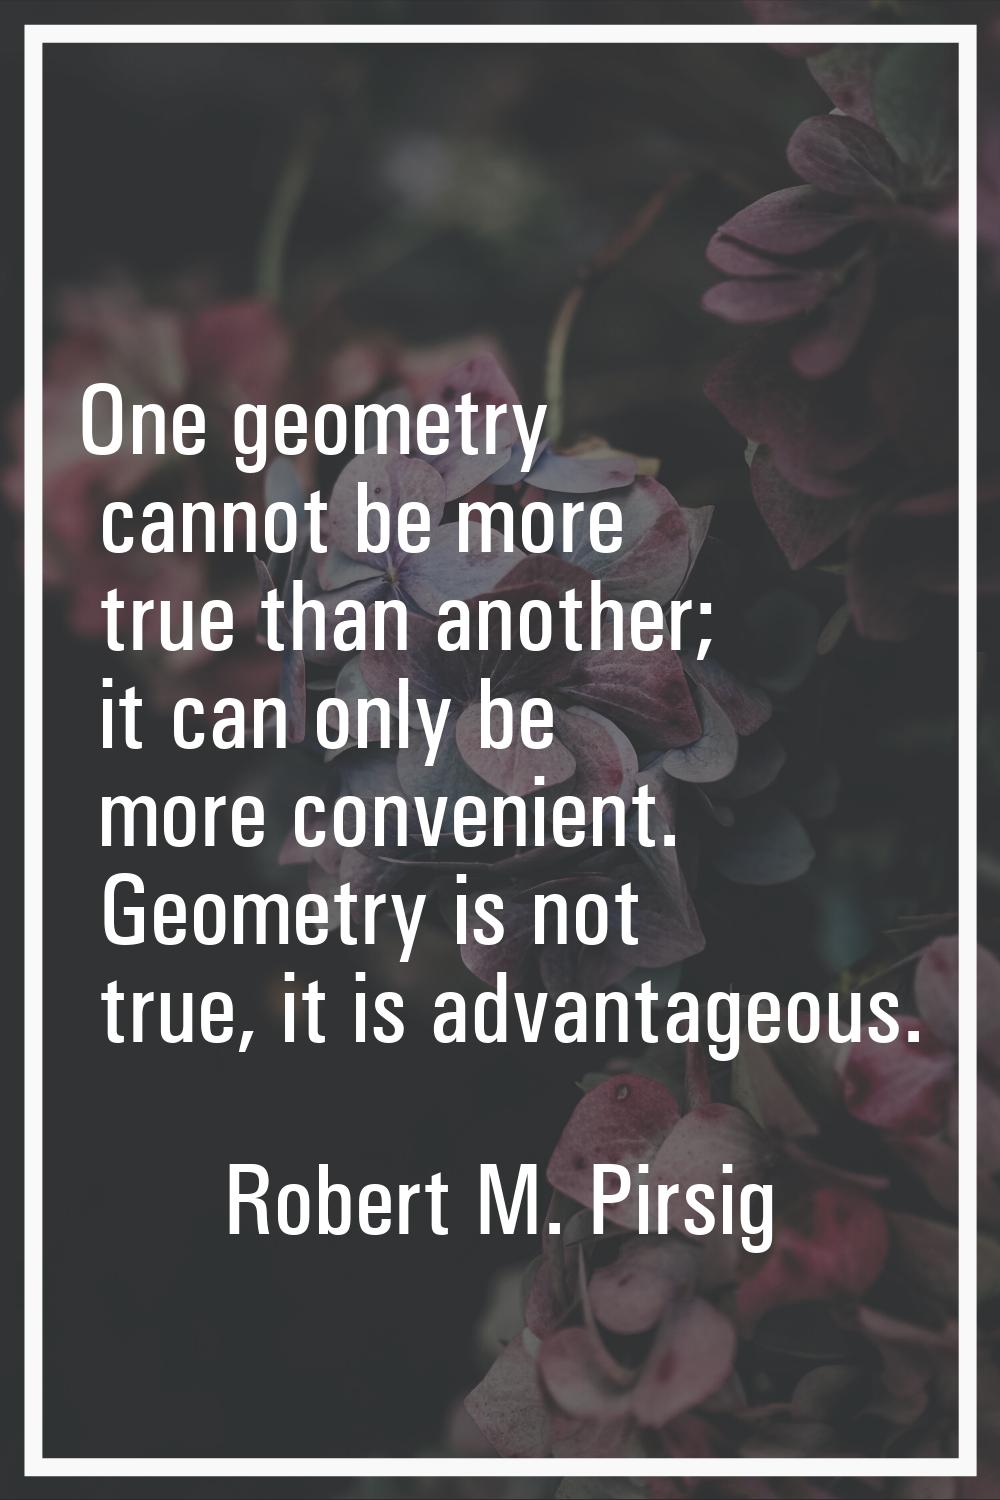 One geometry cannot be more true than another; it can only be more convenient. Geometry is not true